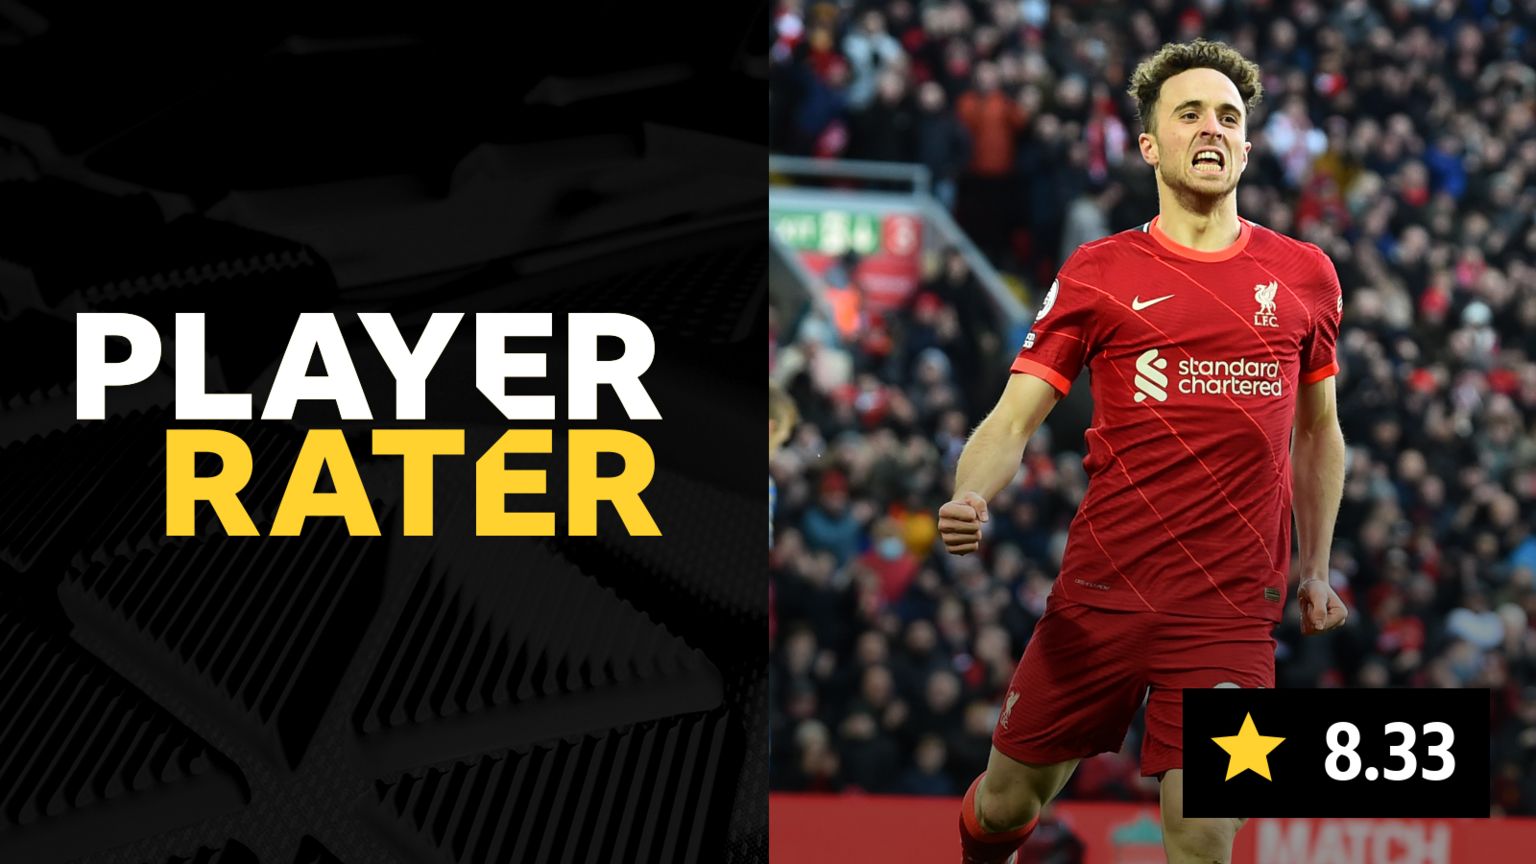 Player Rater - Diogo Jota scored 8.33